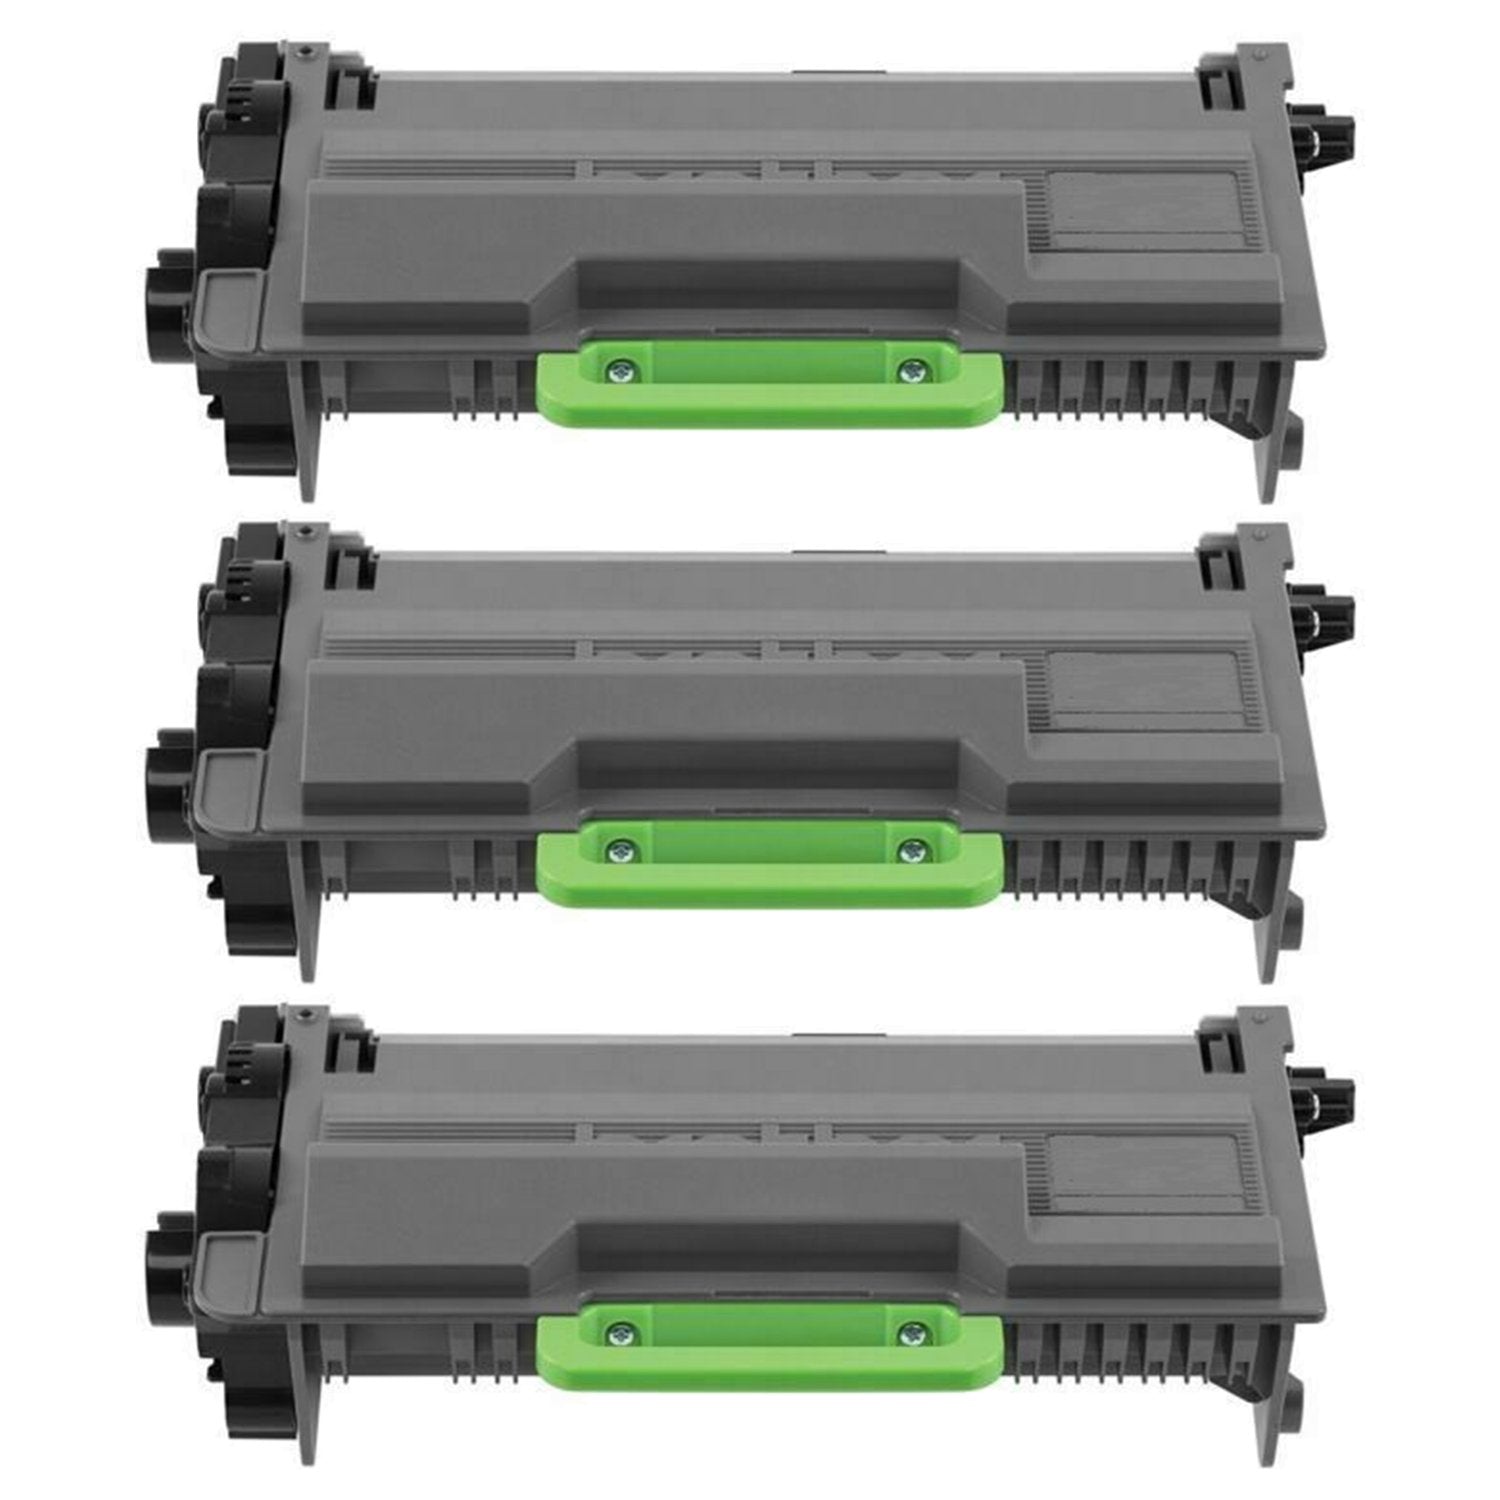 Absolute Toner Compatible Brother TN880 High Yield Black Toner Cartridge | Absolute Toner Brother Toner Cartridges